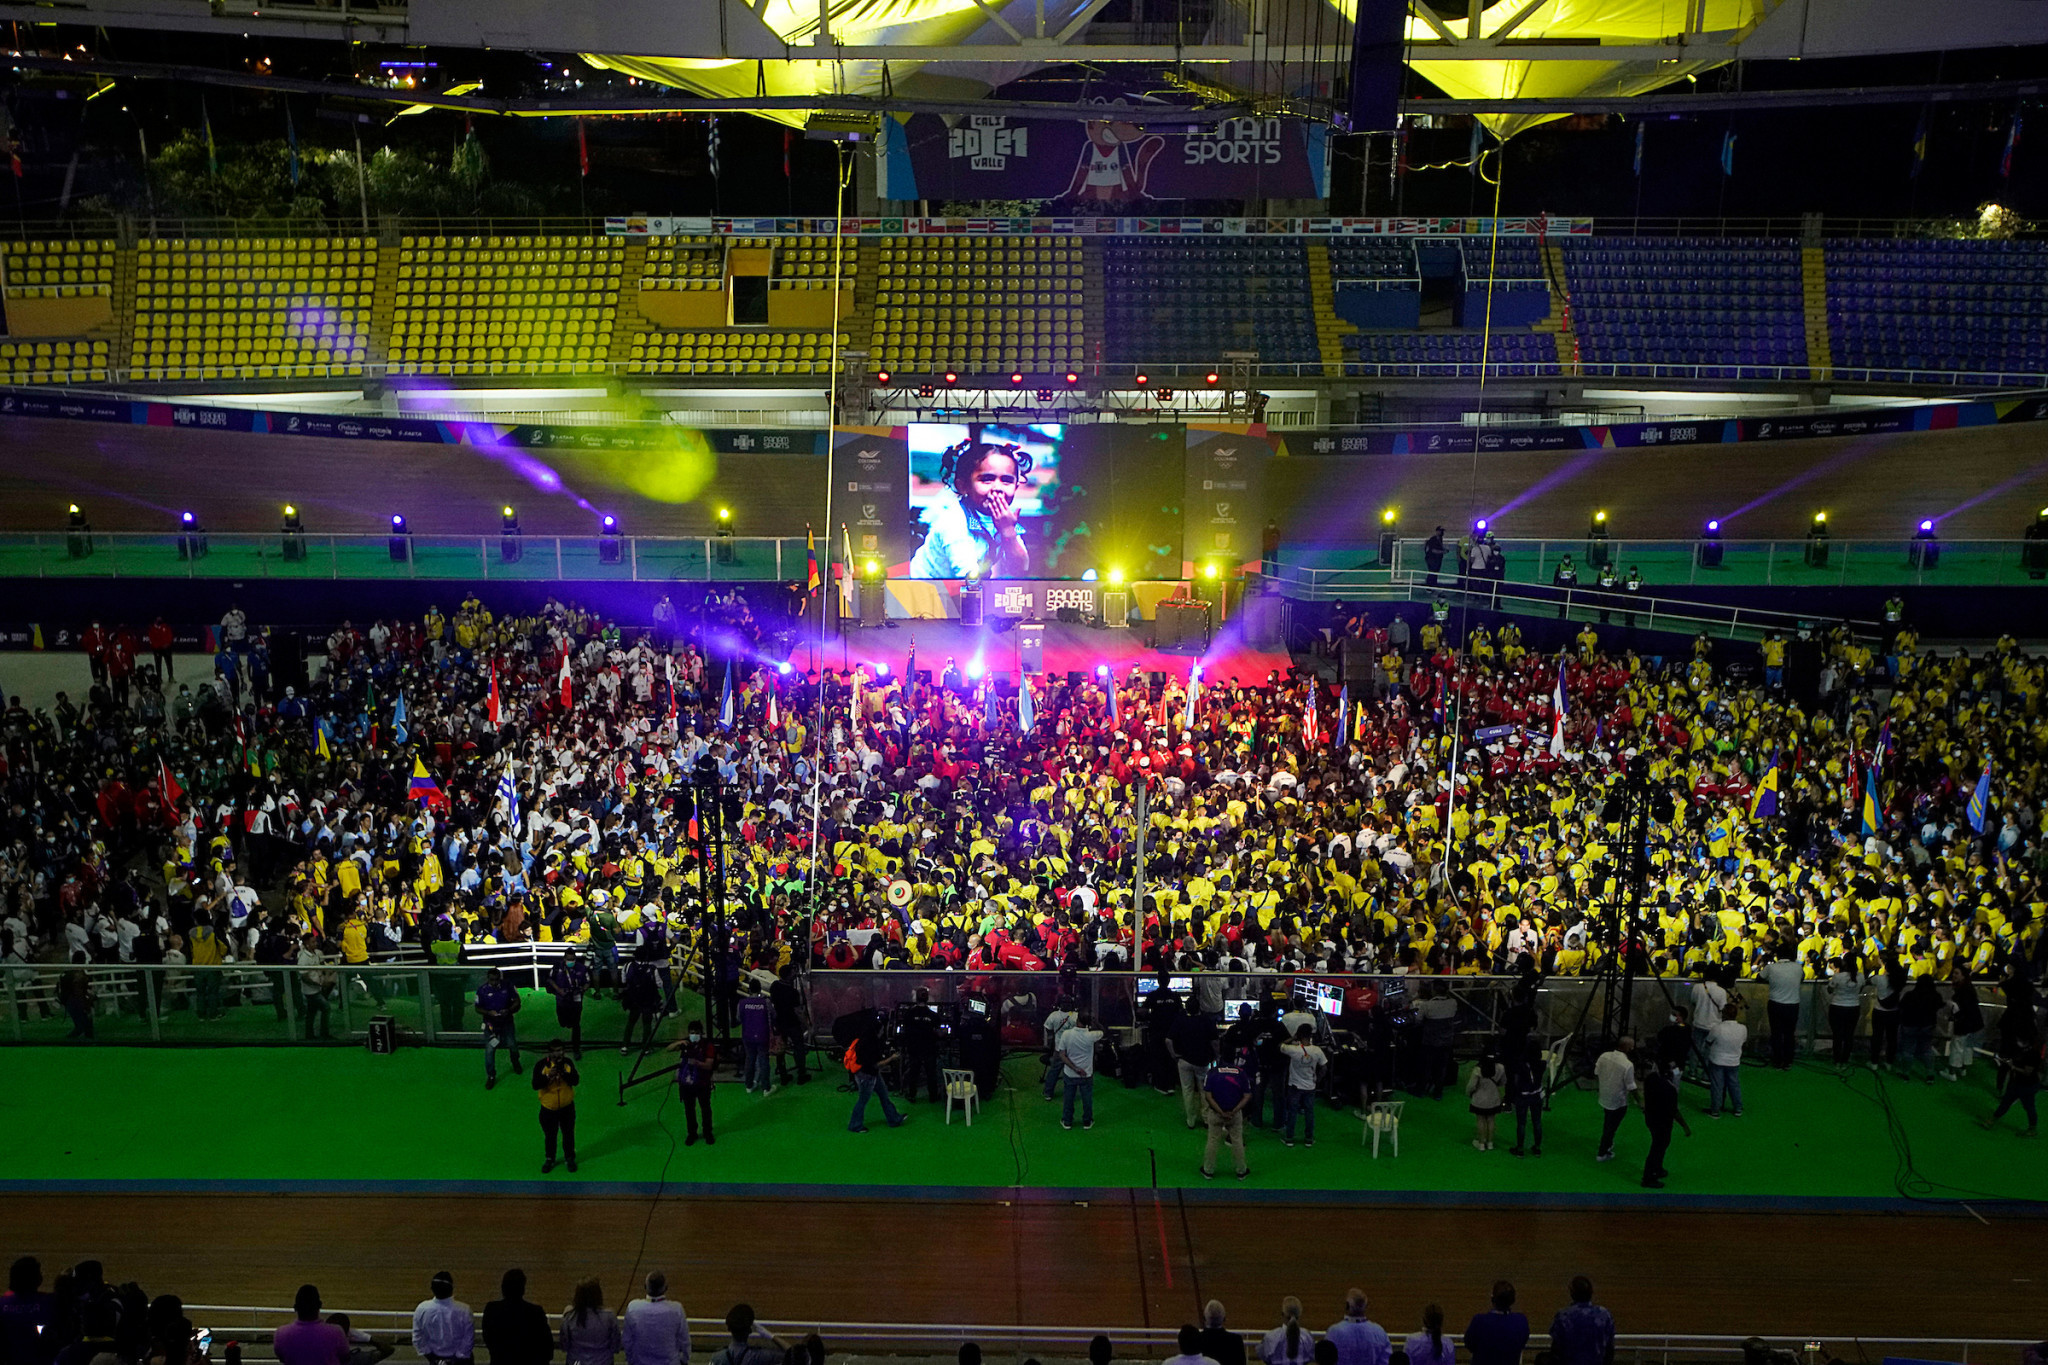 Approximately 3,000 volunteers were in the centre of the velodrome for the event ©Agencia.Xpress Media